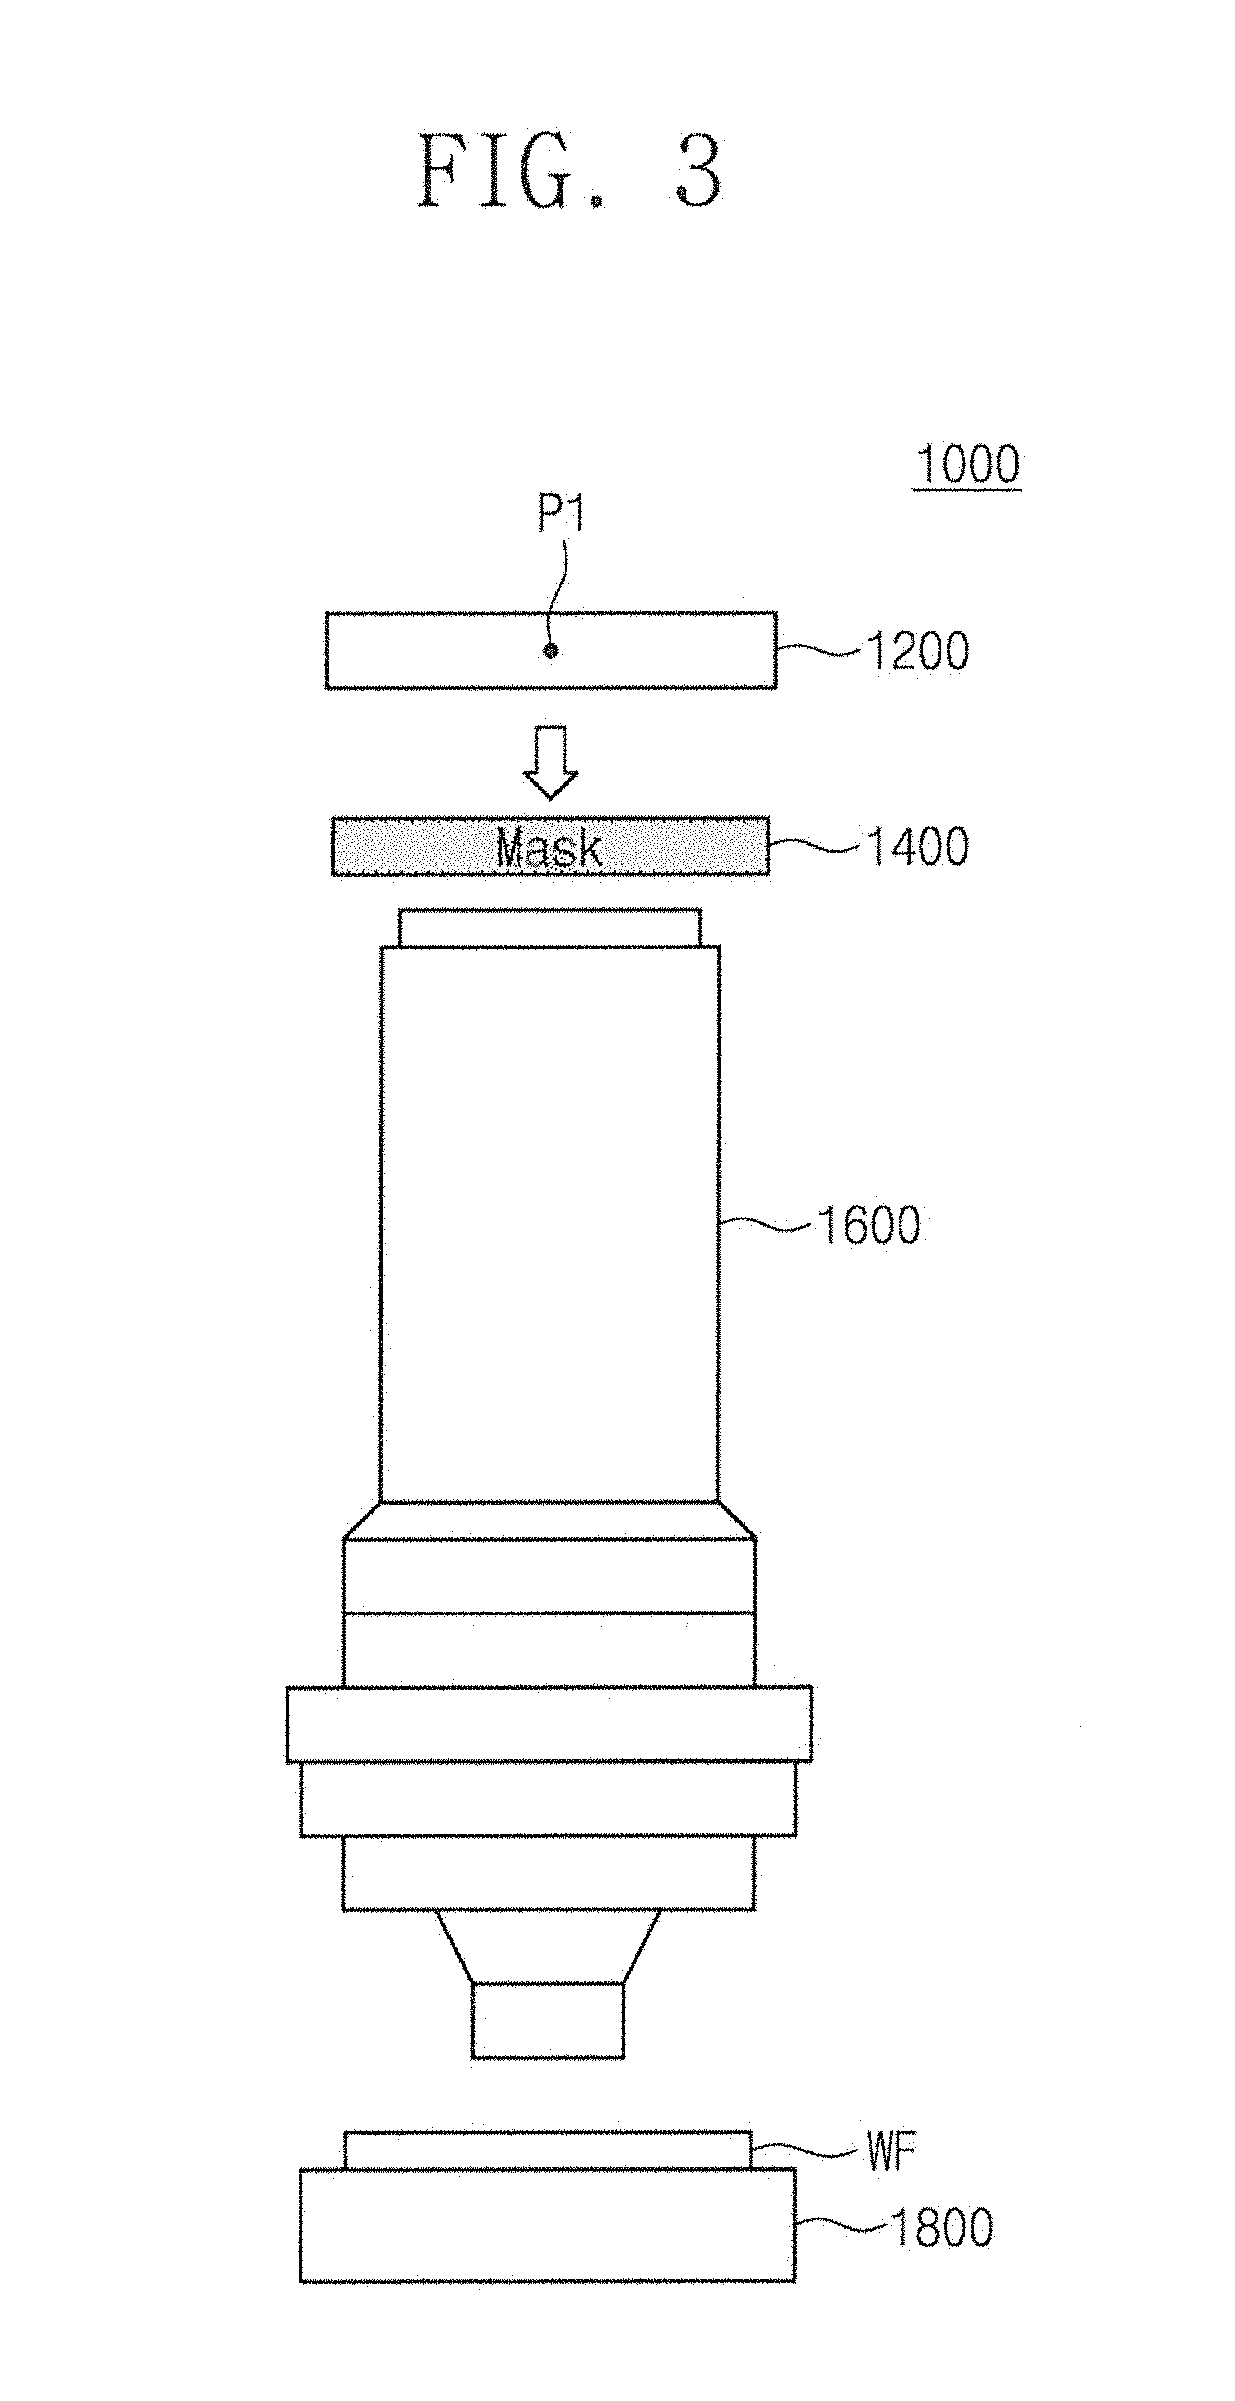 Methods of improving optical proximity correction models and methods of fabricating semiconductor devices using the same